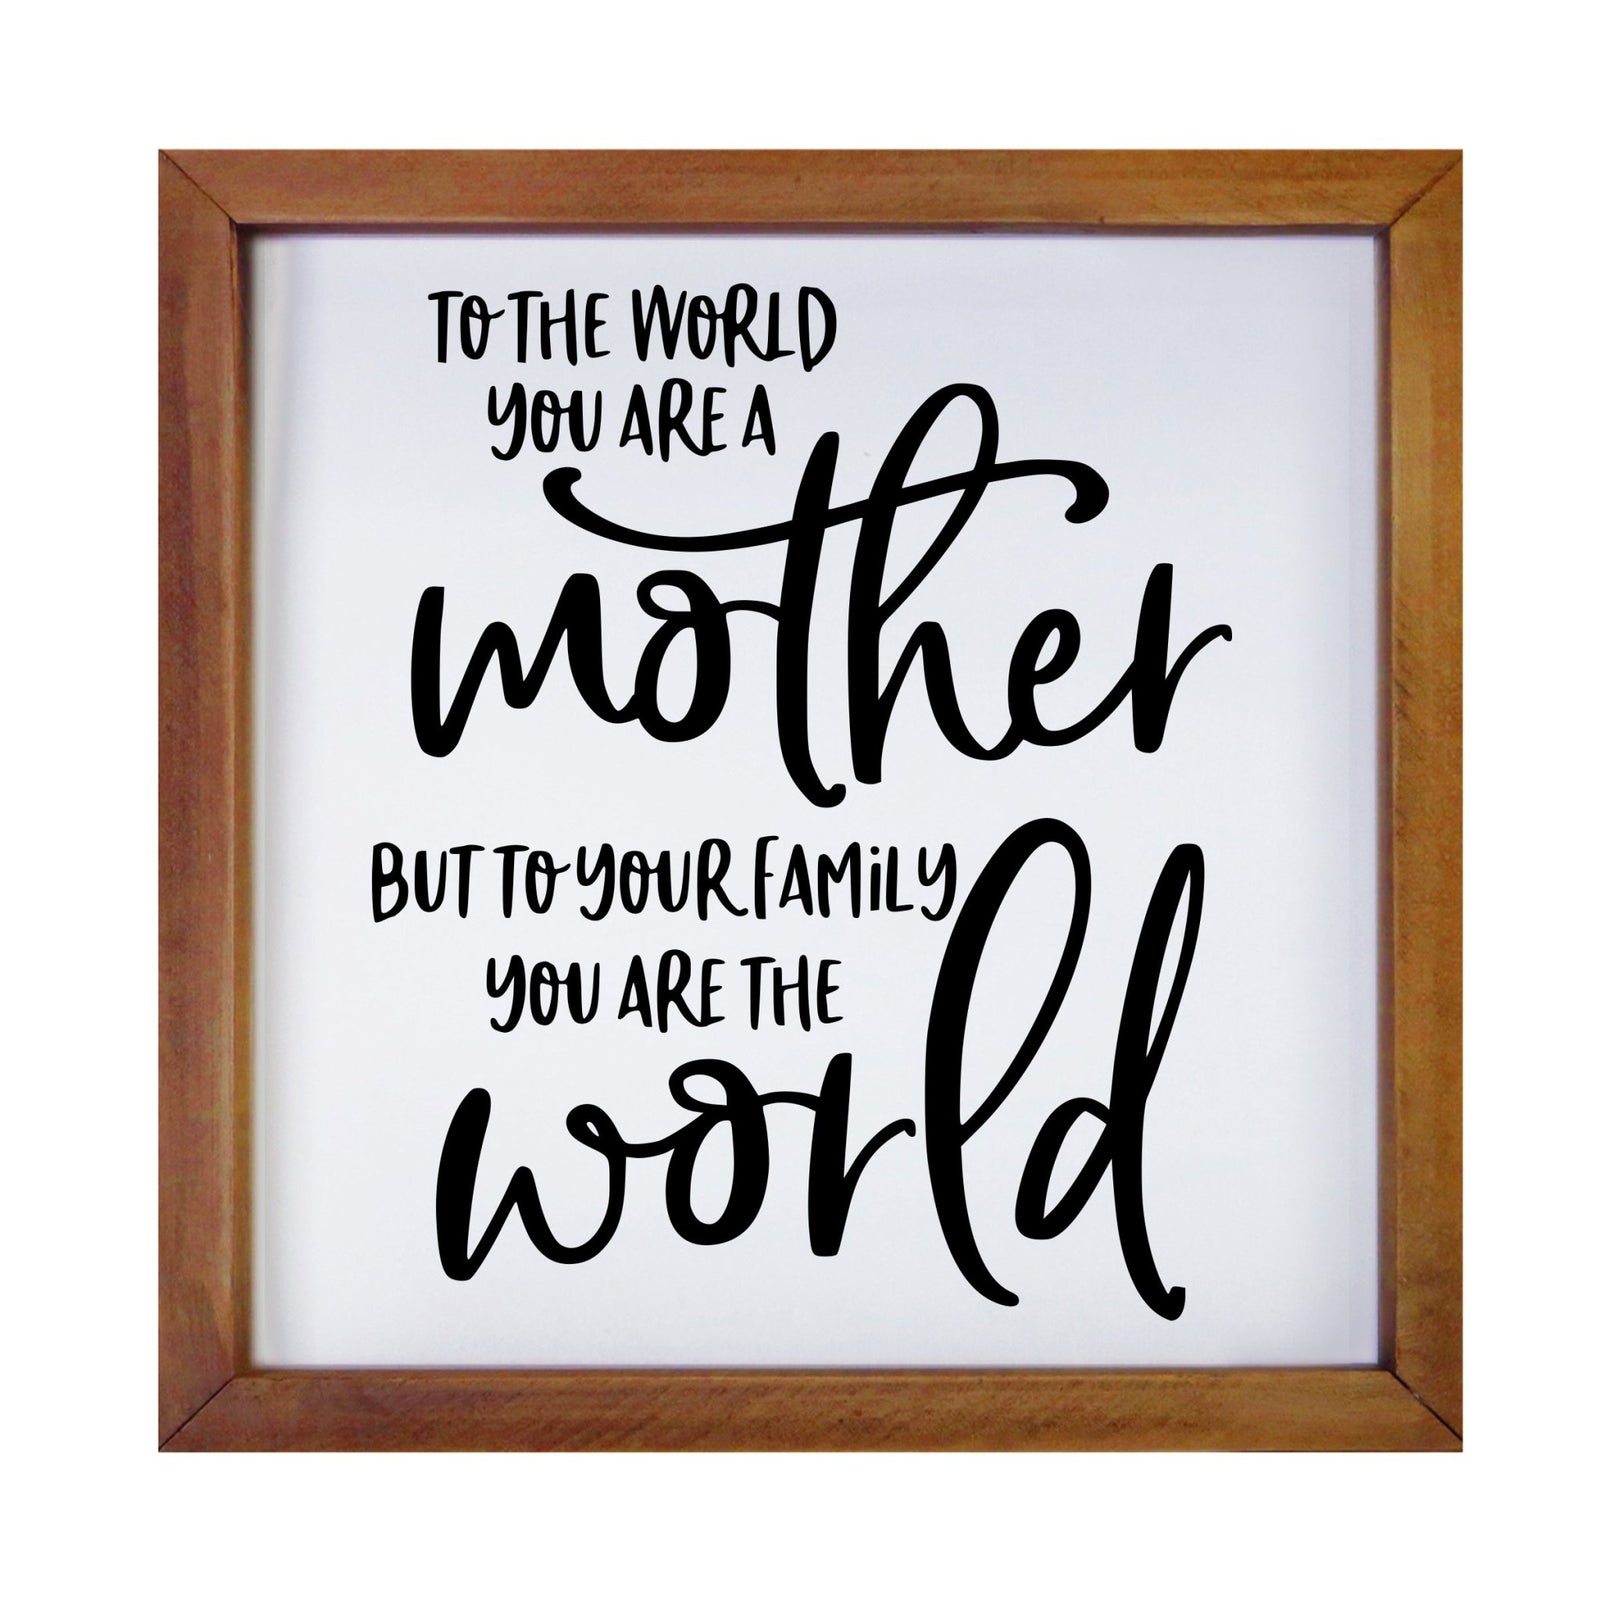 Inspiring Modern Framed Shadow Box 7x7in - To The World You Are A Mother - LifeSong Milestones